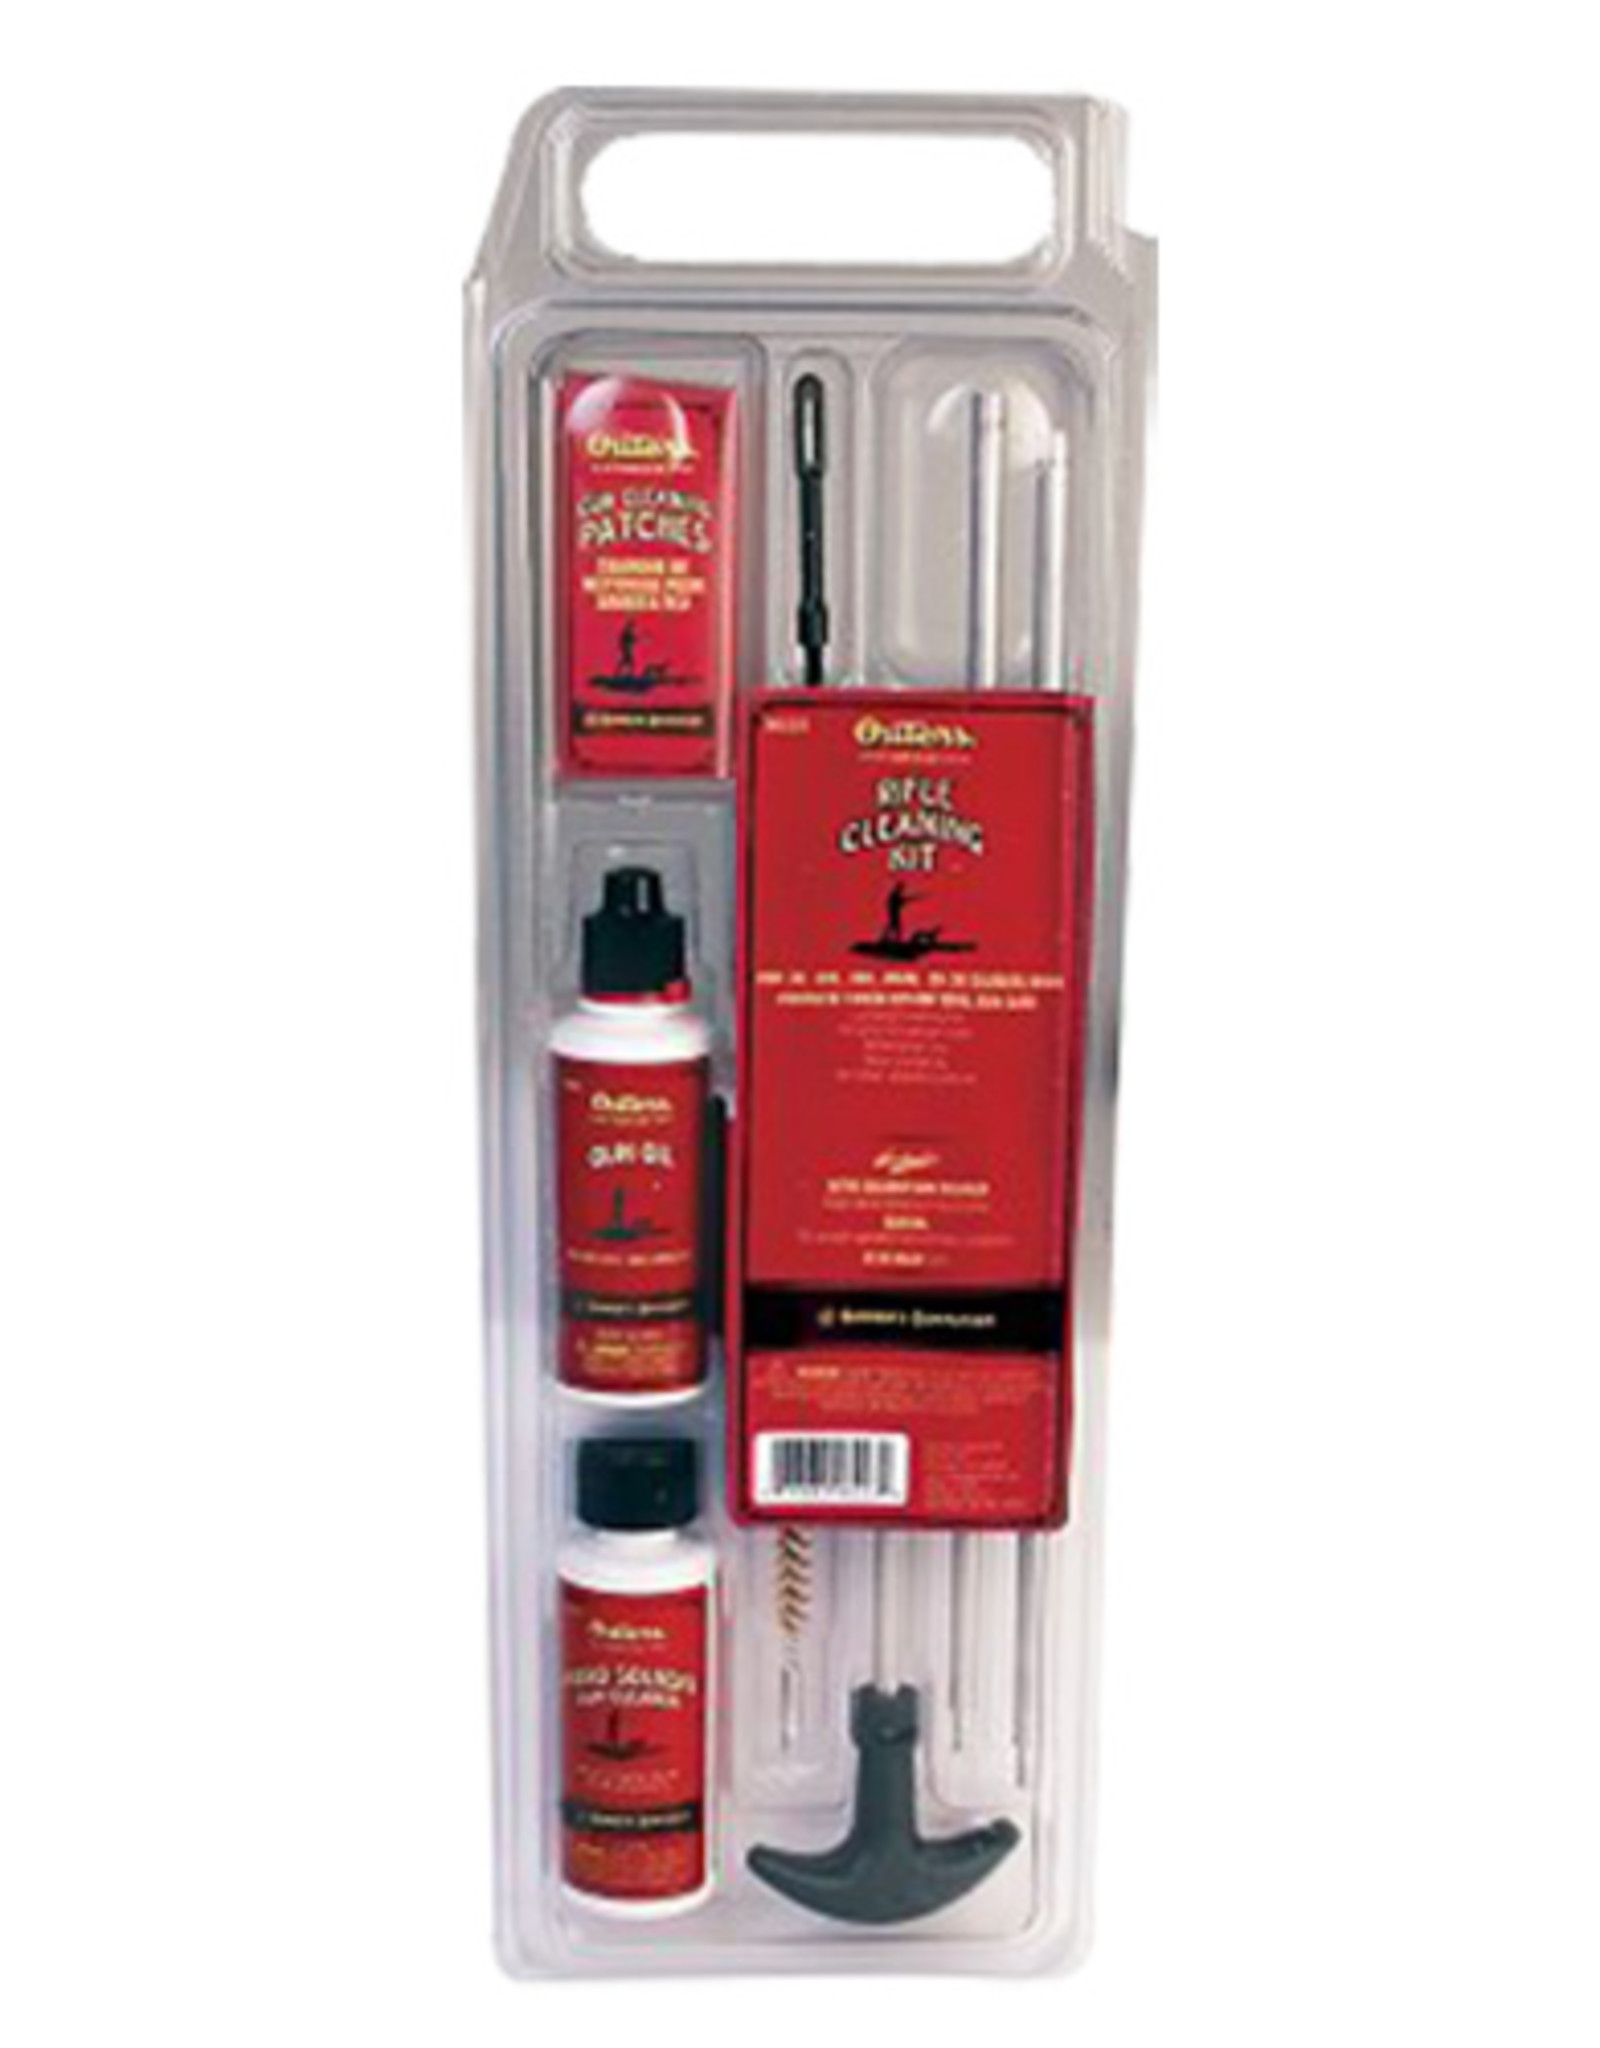 OUTERS Outers Rifle Cleaning Kit for .234, .25, 6mm, 6.5mm